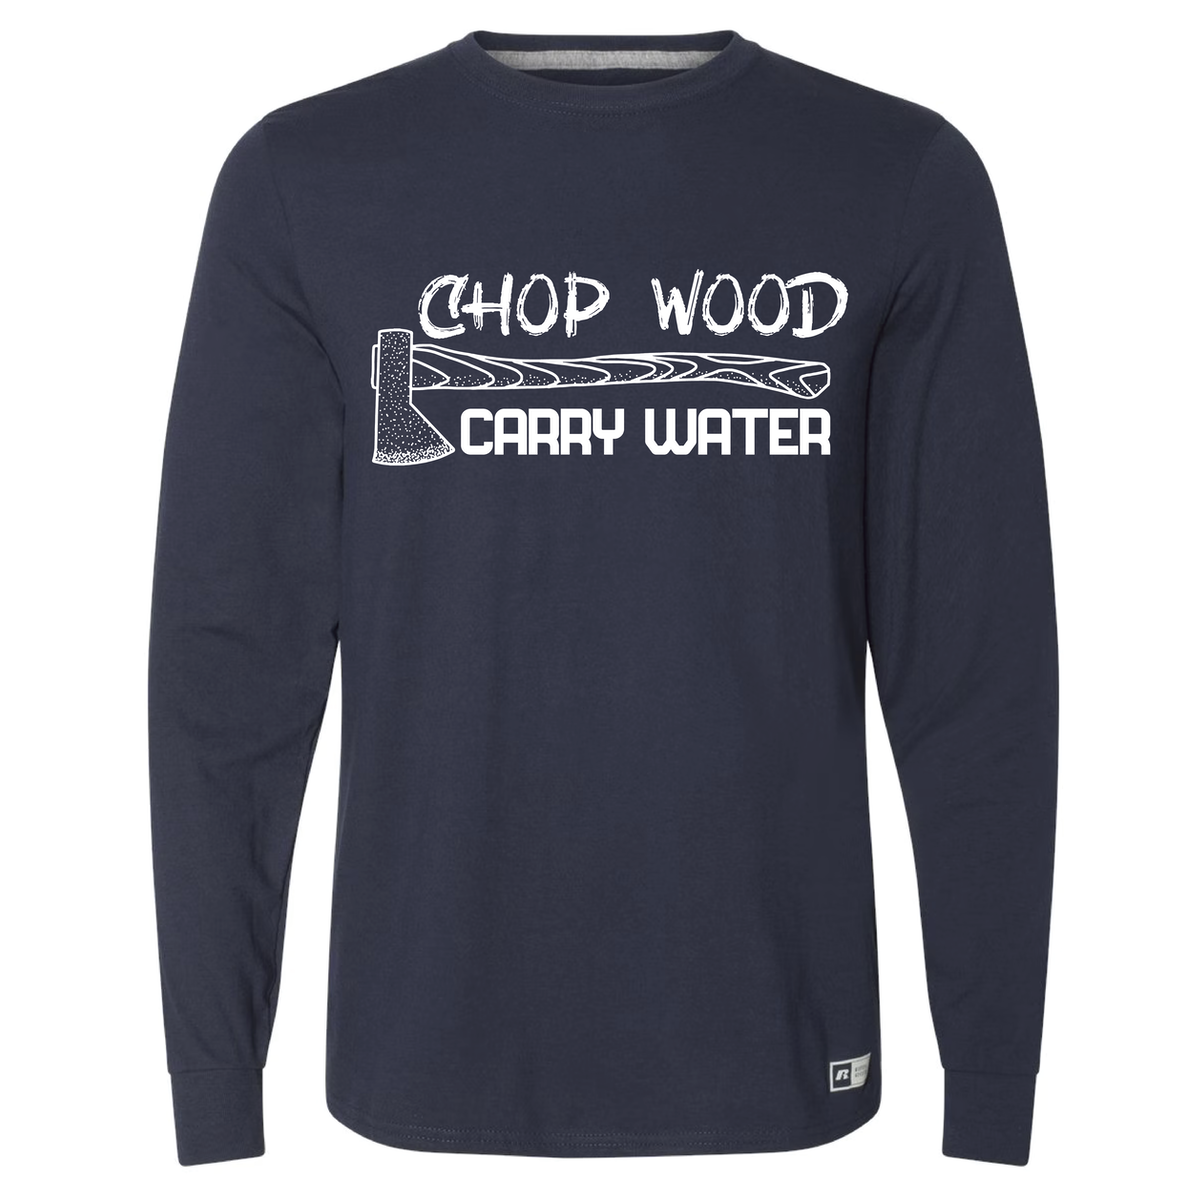 Chop Wood, Carry Water